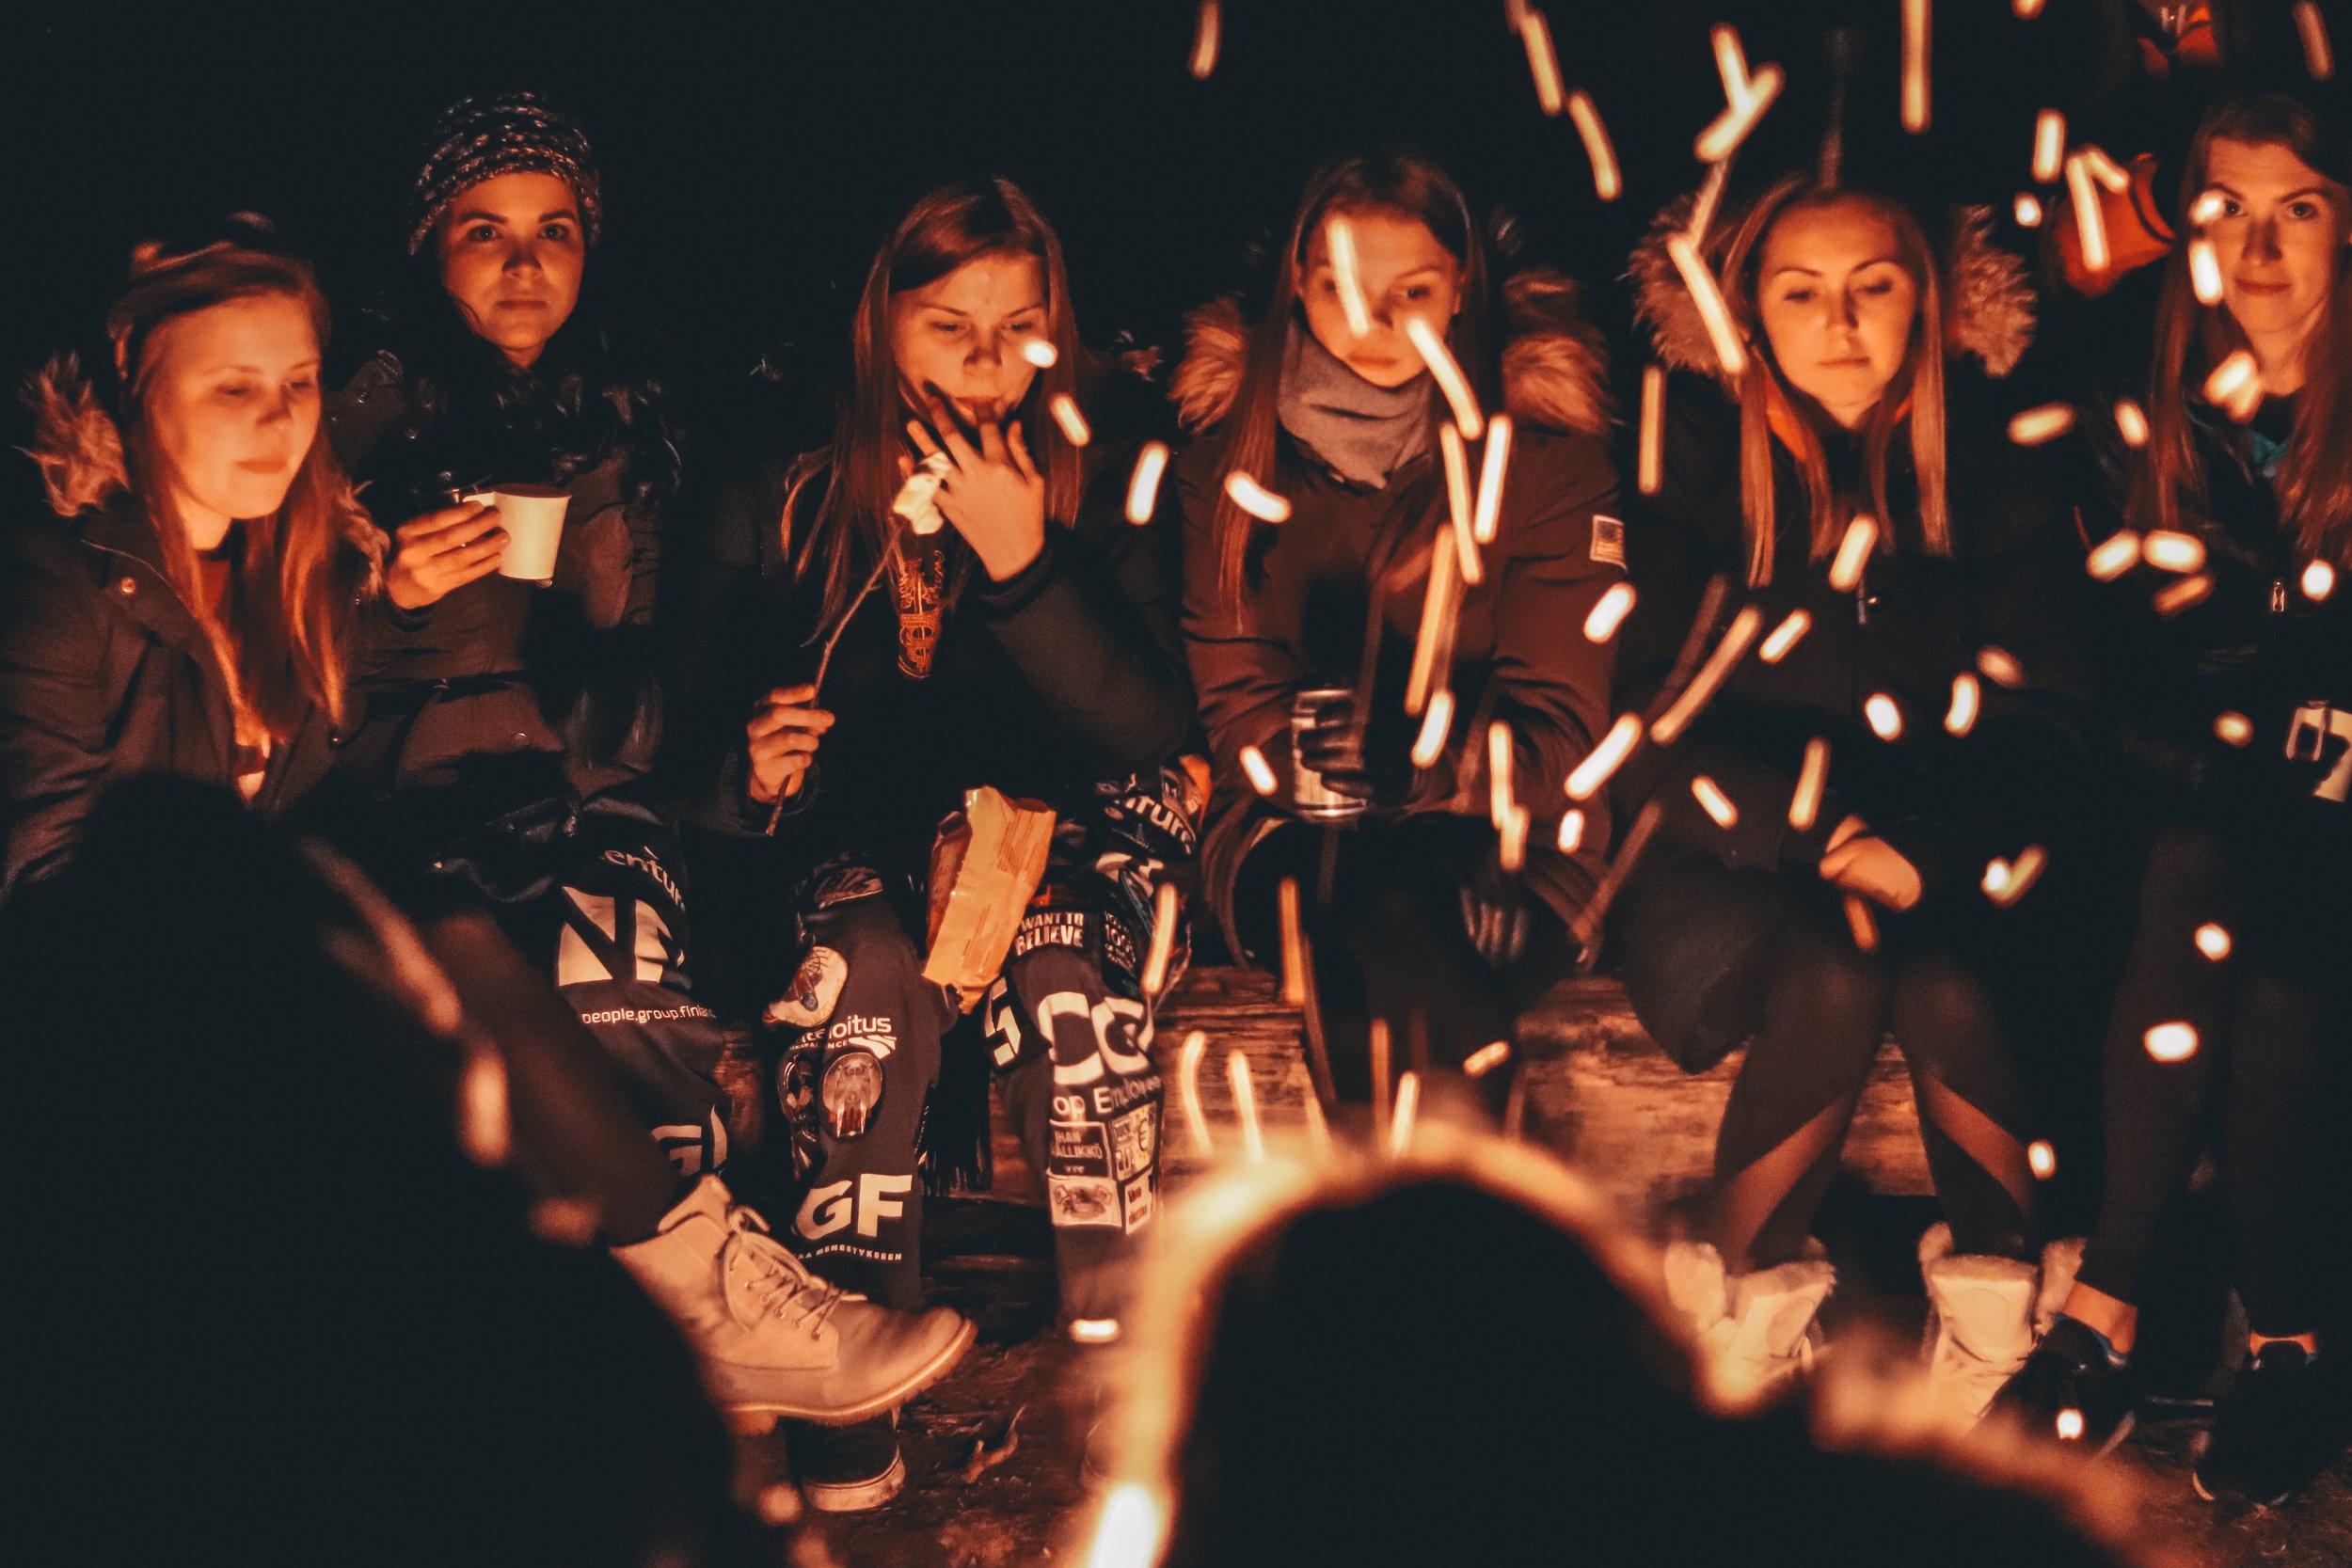 Sell tickets to your bonfire night events with the leading Eventbrite alternative